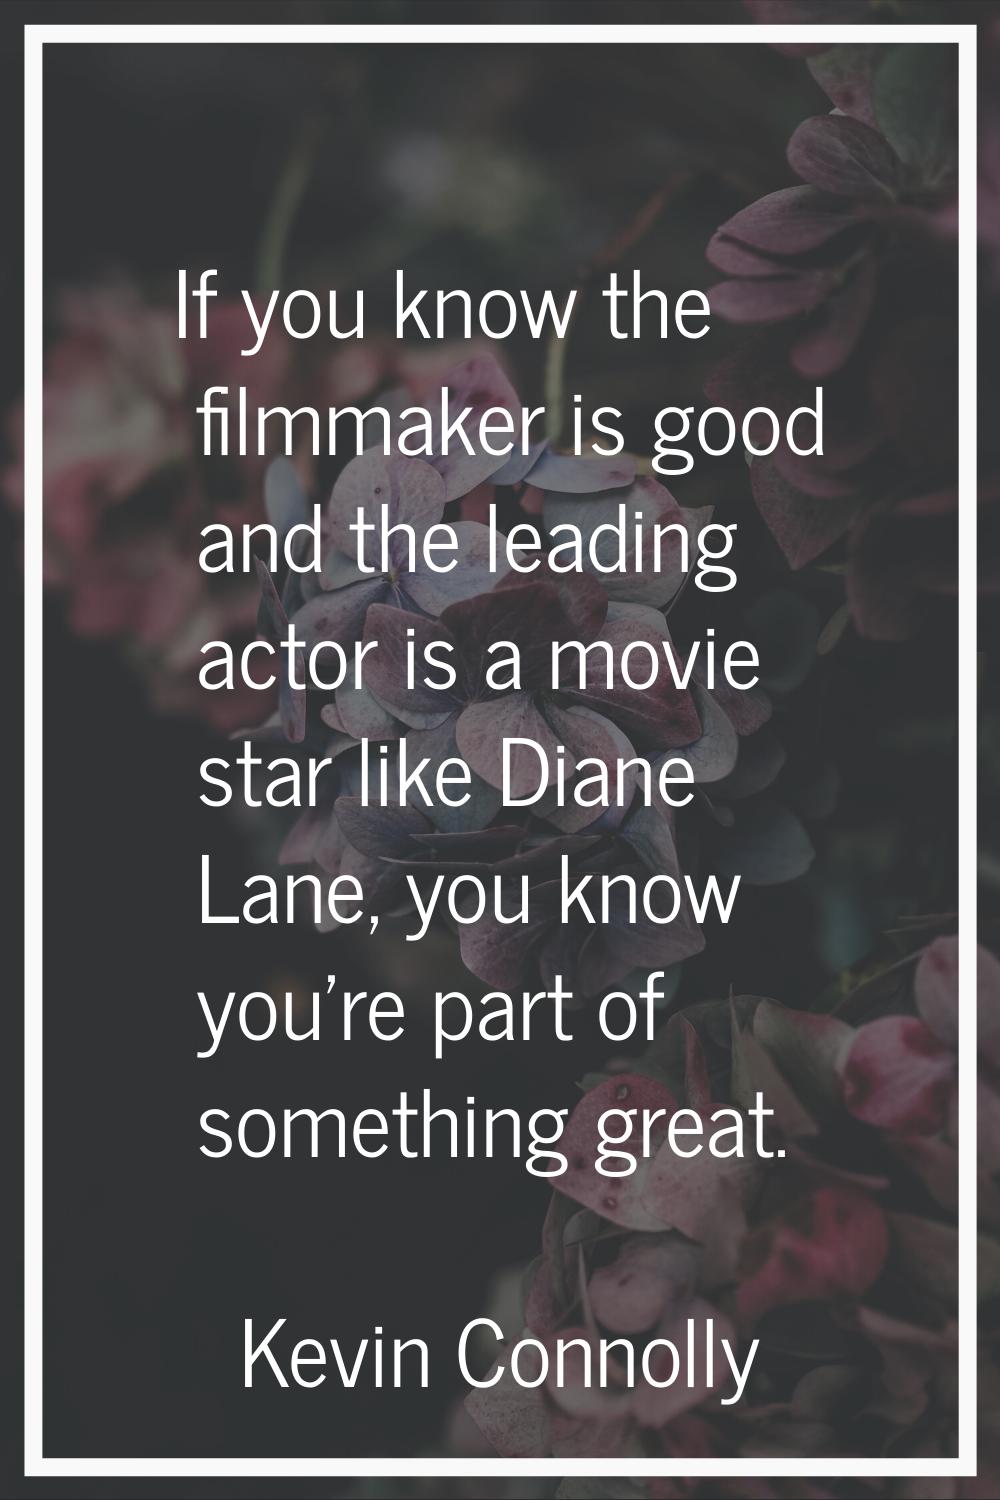 If you know the filmmaker is good and the leading actor is a movie star like Diane Lane, you know y